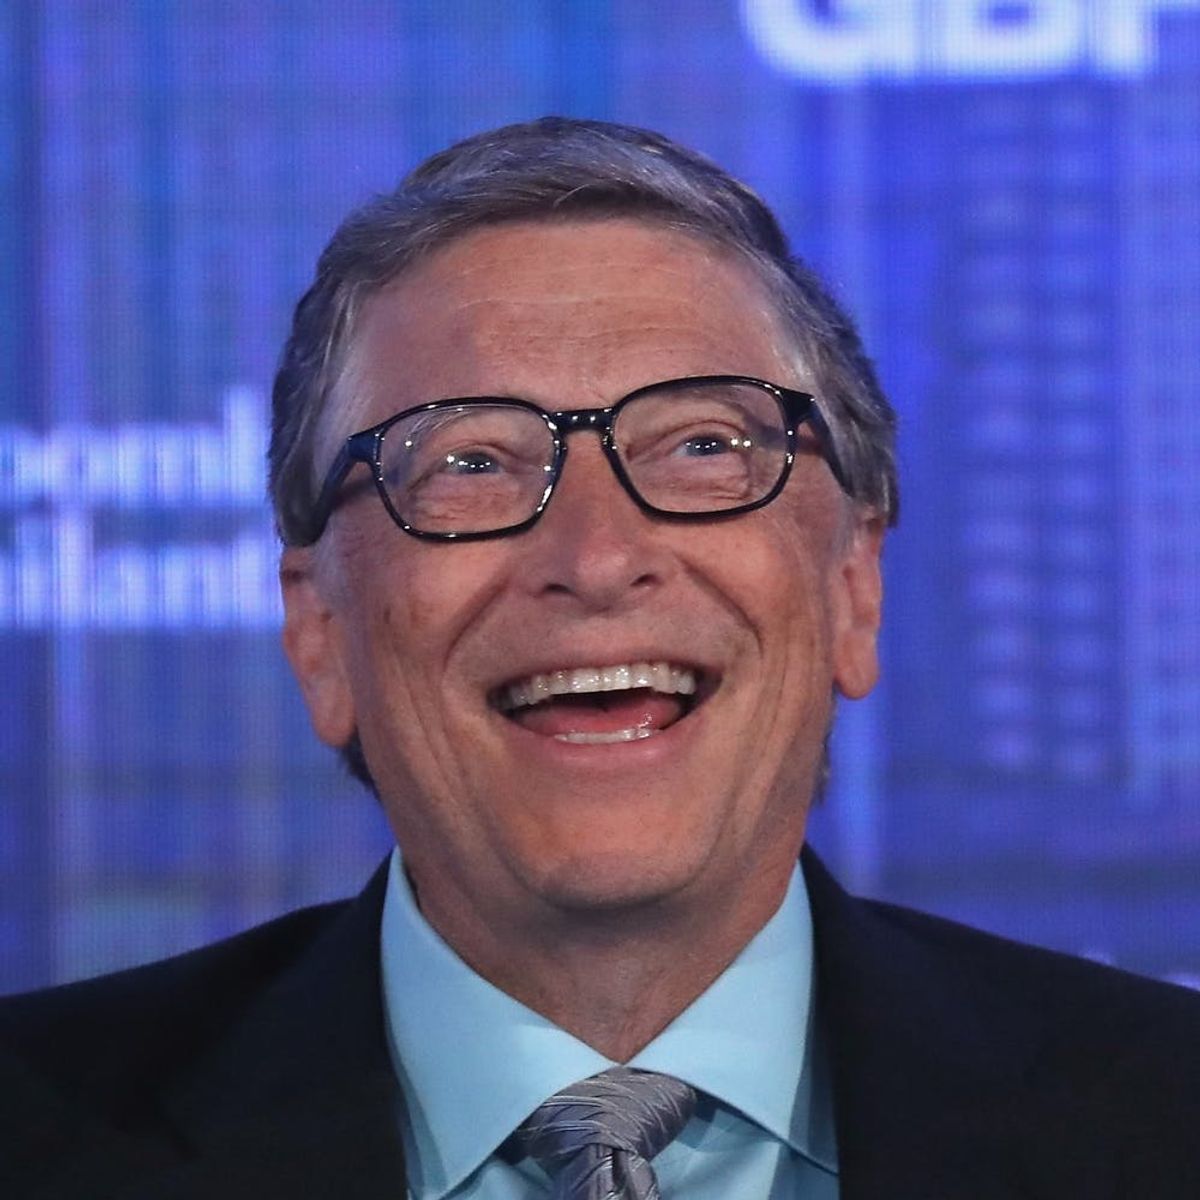 Bill Gates Upheld His Title As the Best Secret Santa Ever With This Sweet Charitable Gift